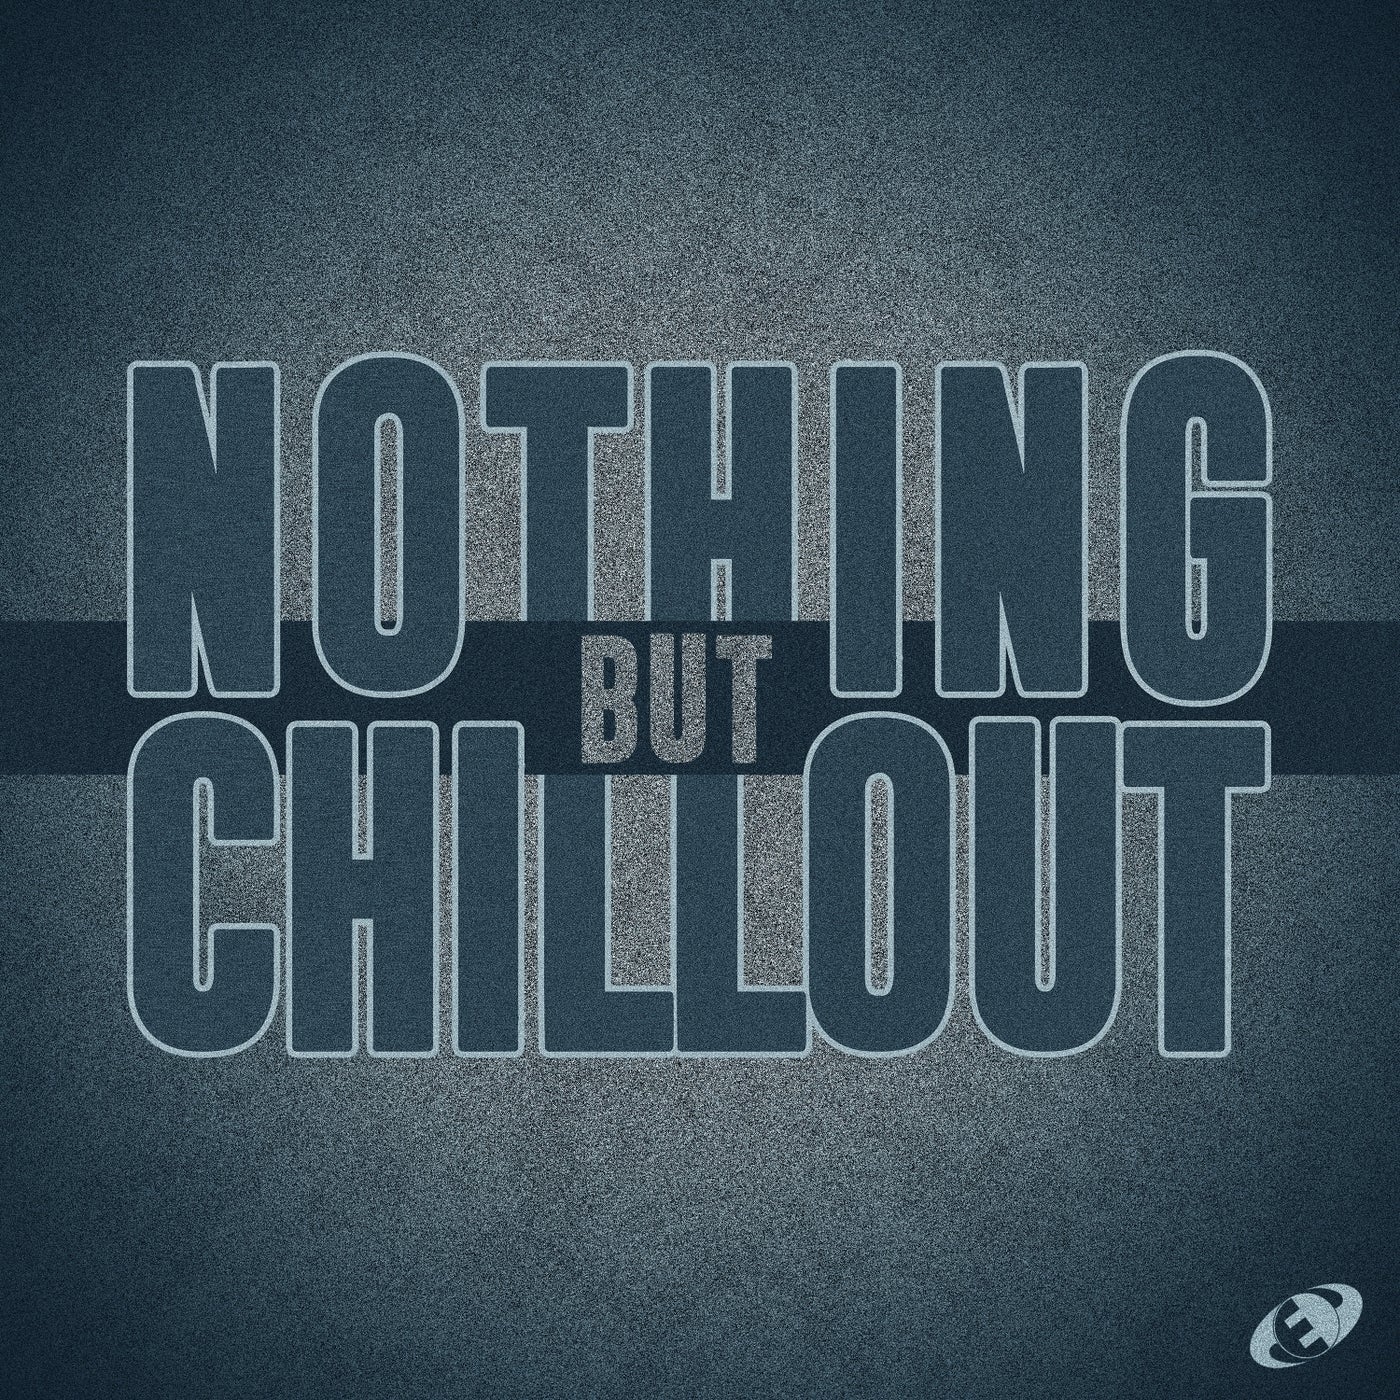 Nothing but Chillout, Vol.05